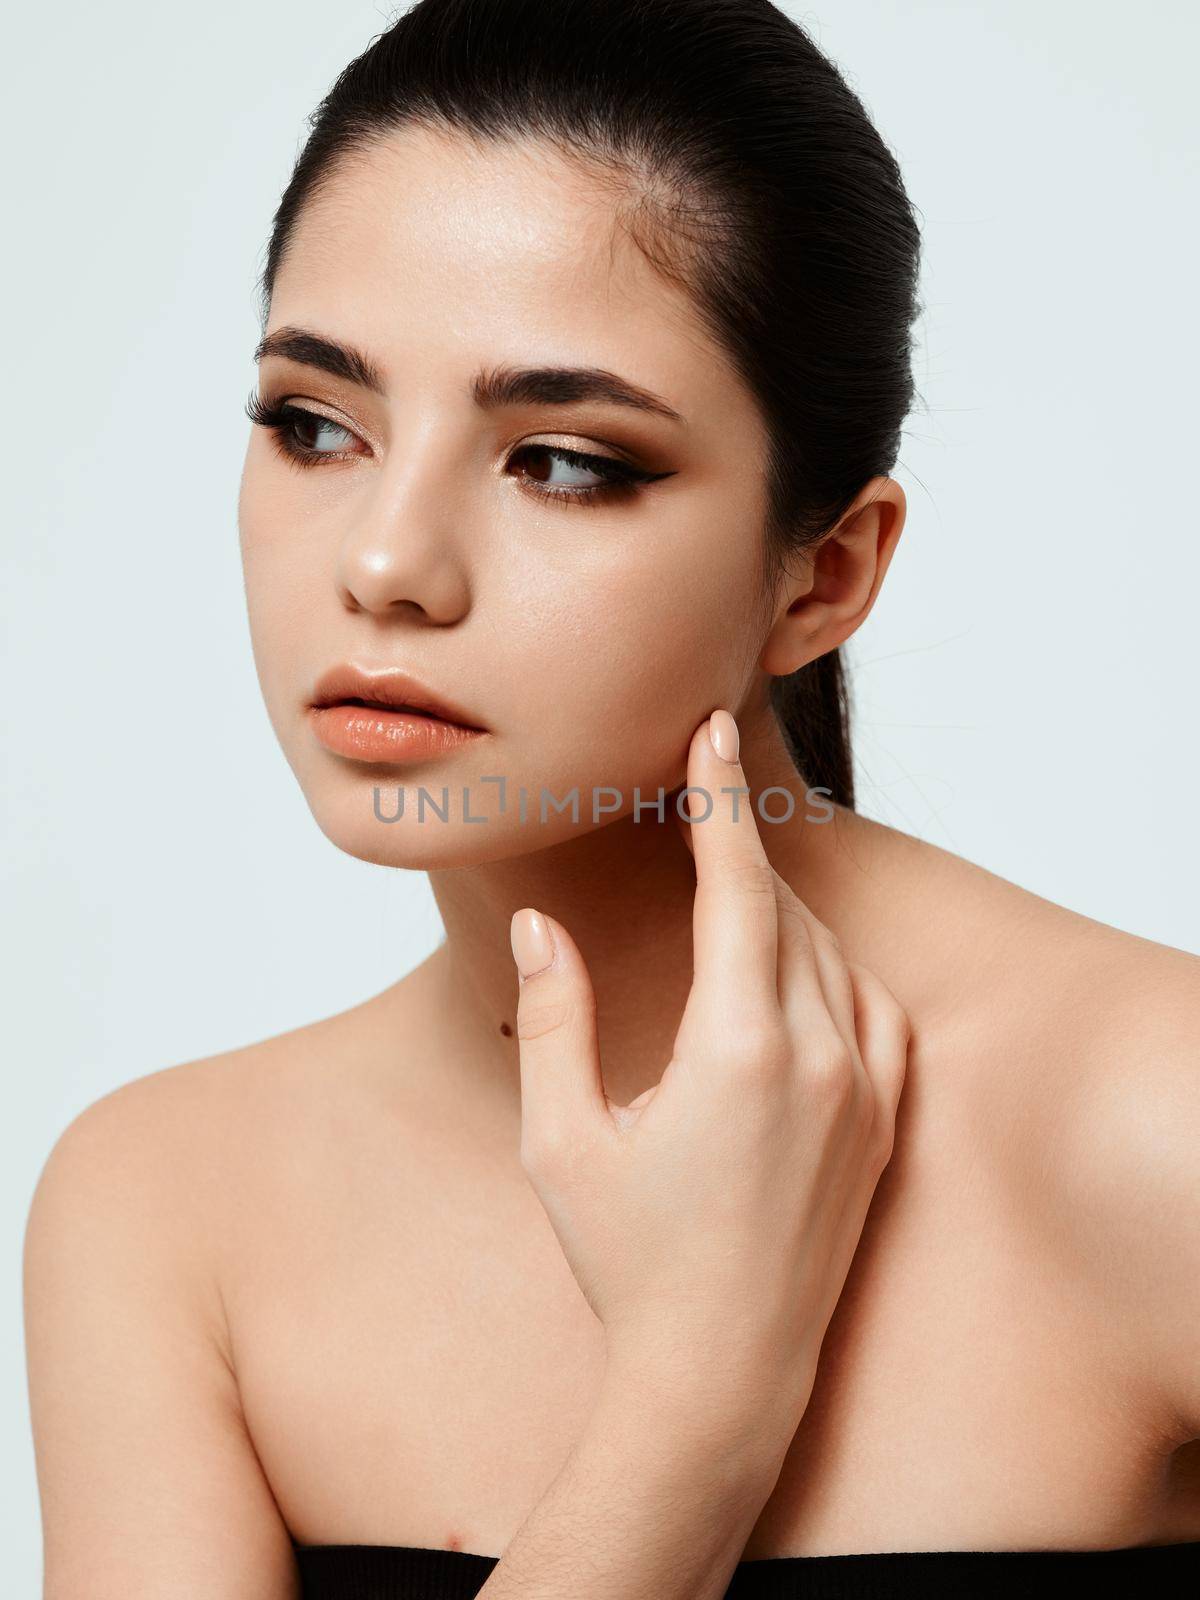 Woman in black dress nude adhesive makeup model hand near face by SHOTPRIME